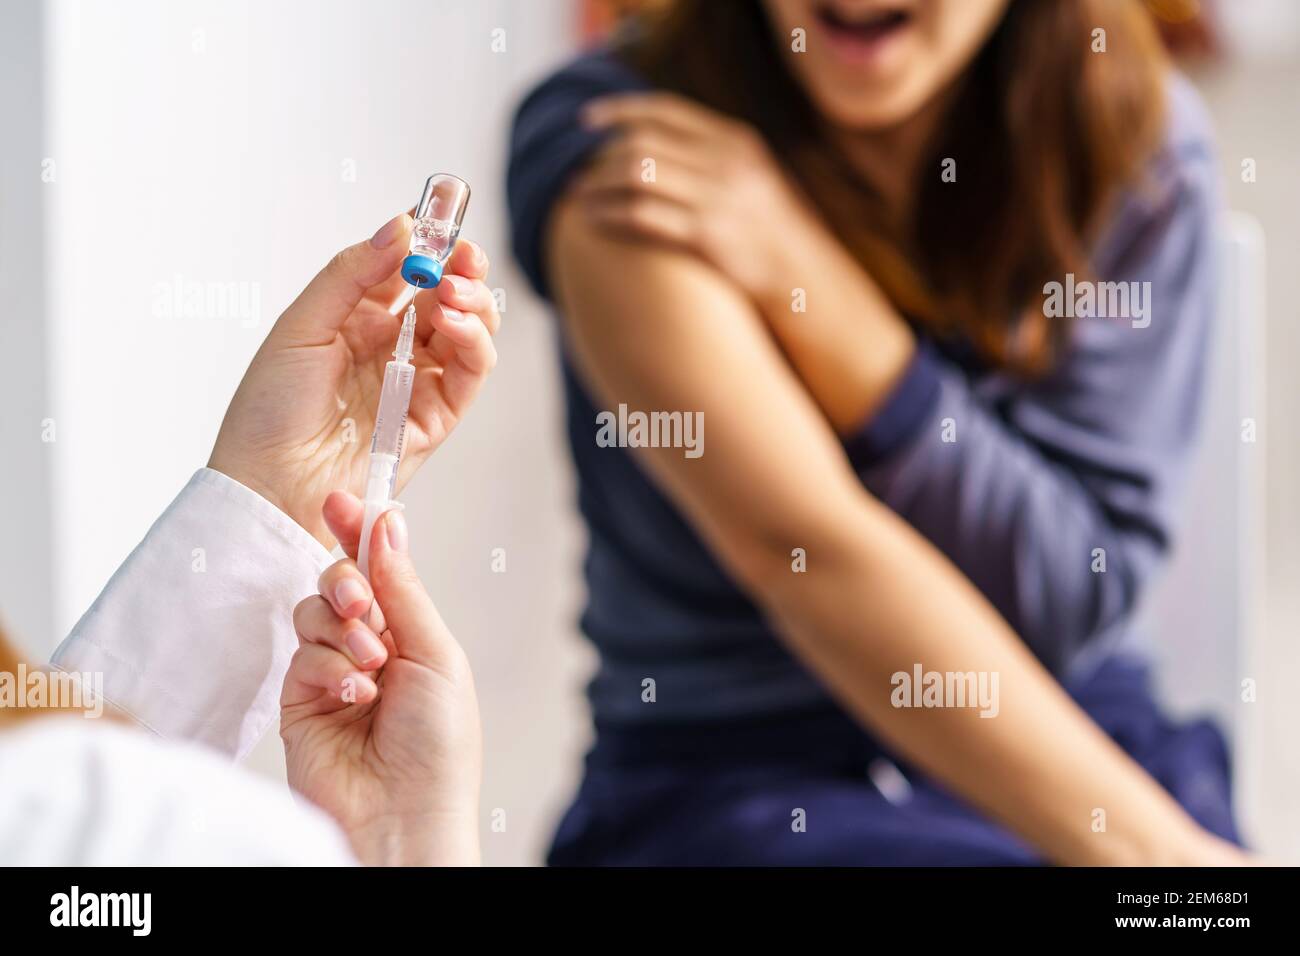 Vaccination healthcare concept - Hands of doctor or nurse hold a syringe and ampule preparing a shot of corona virus covid-19 hpv or flu vaccine for u Stock Photo